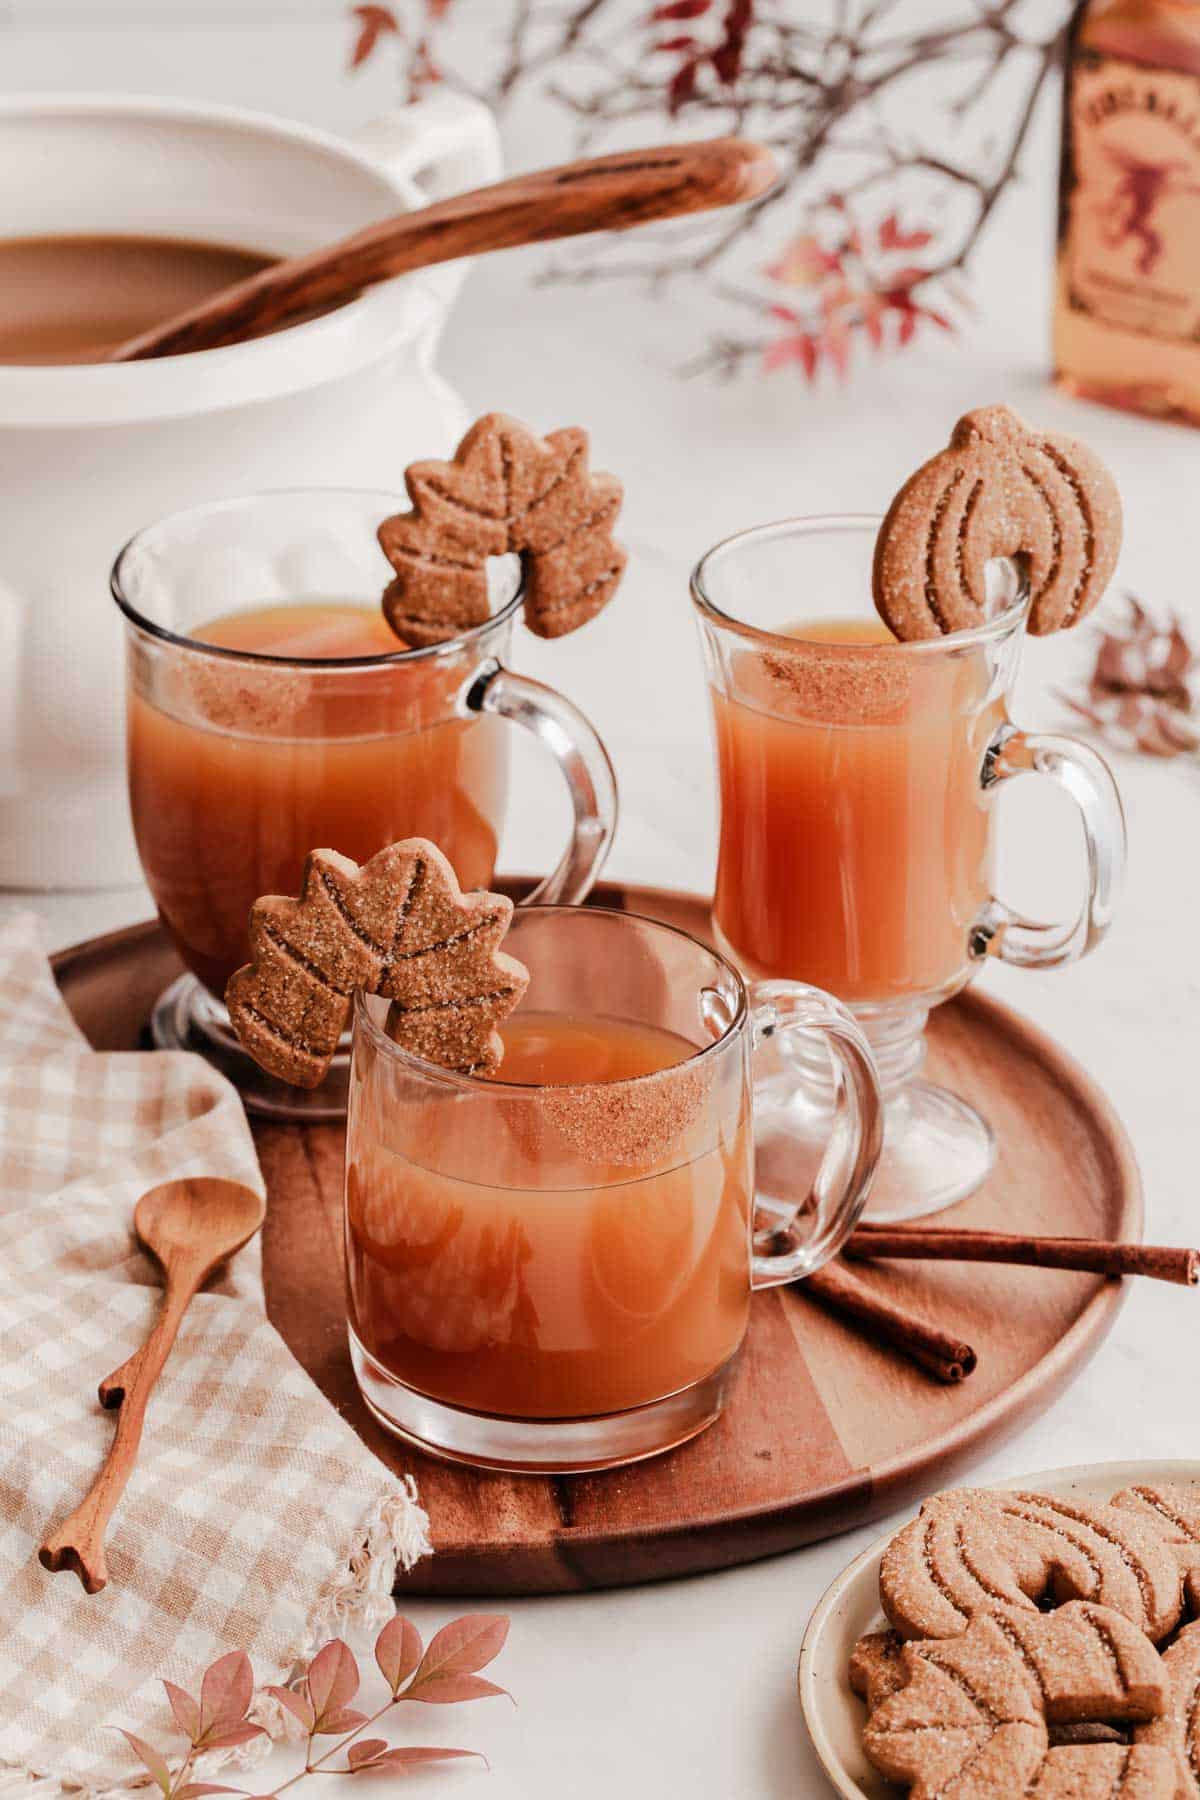 round tray with 3 glass mugs filled with hot cider and cookie garnish on the rim of mugs.